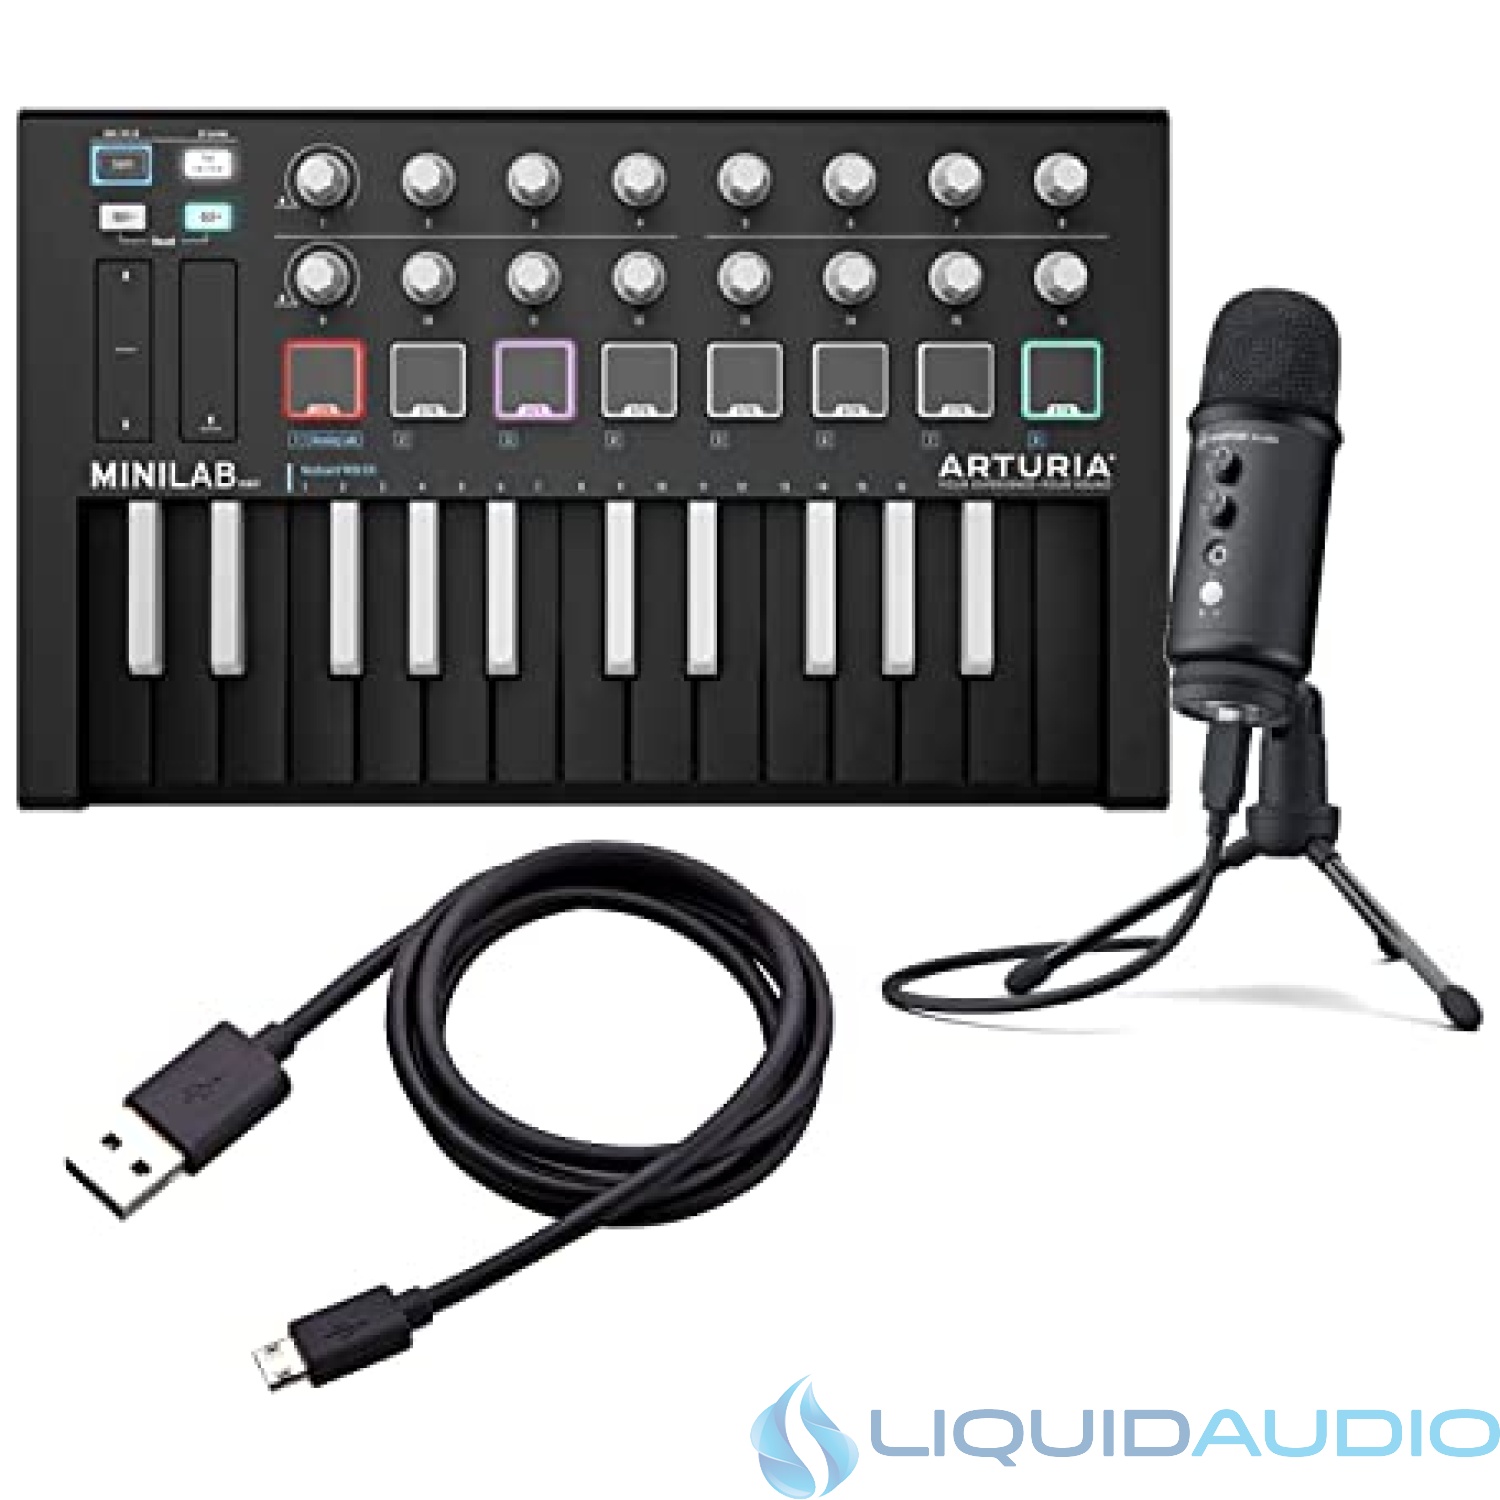 Arturia Minilab MKII Inverted Keyboard with USB Cable, USB Studio Recording Microphone and Tripod Stand Bundle